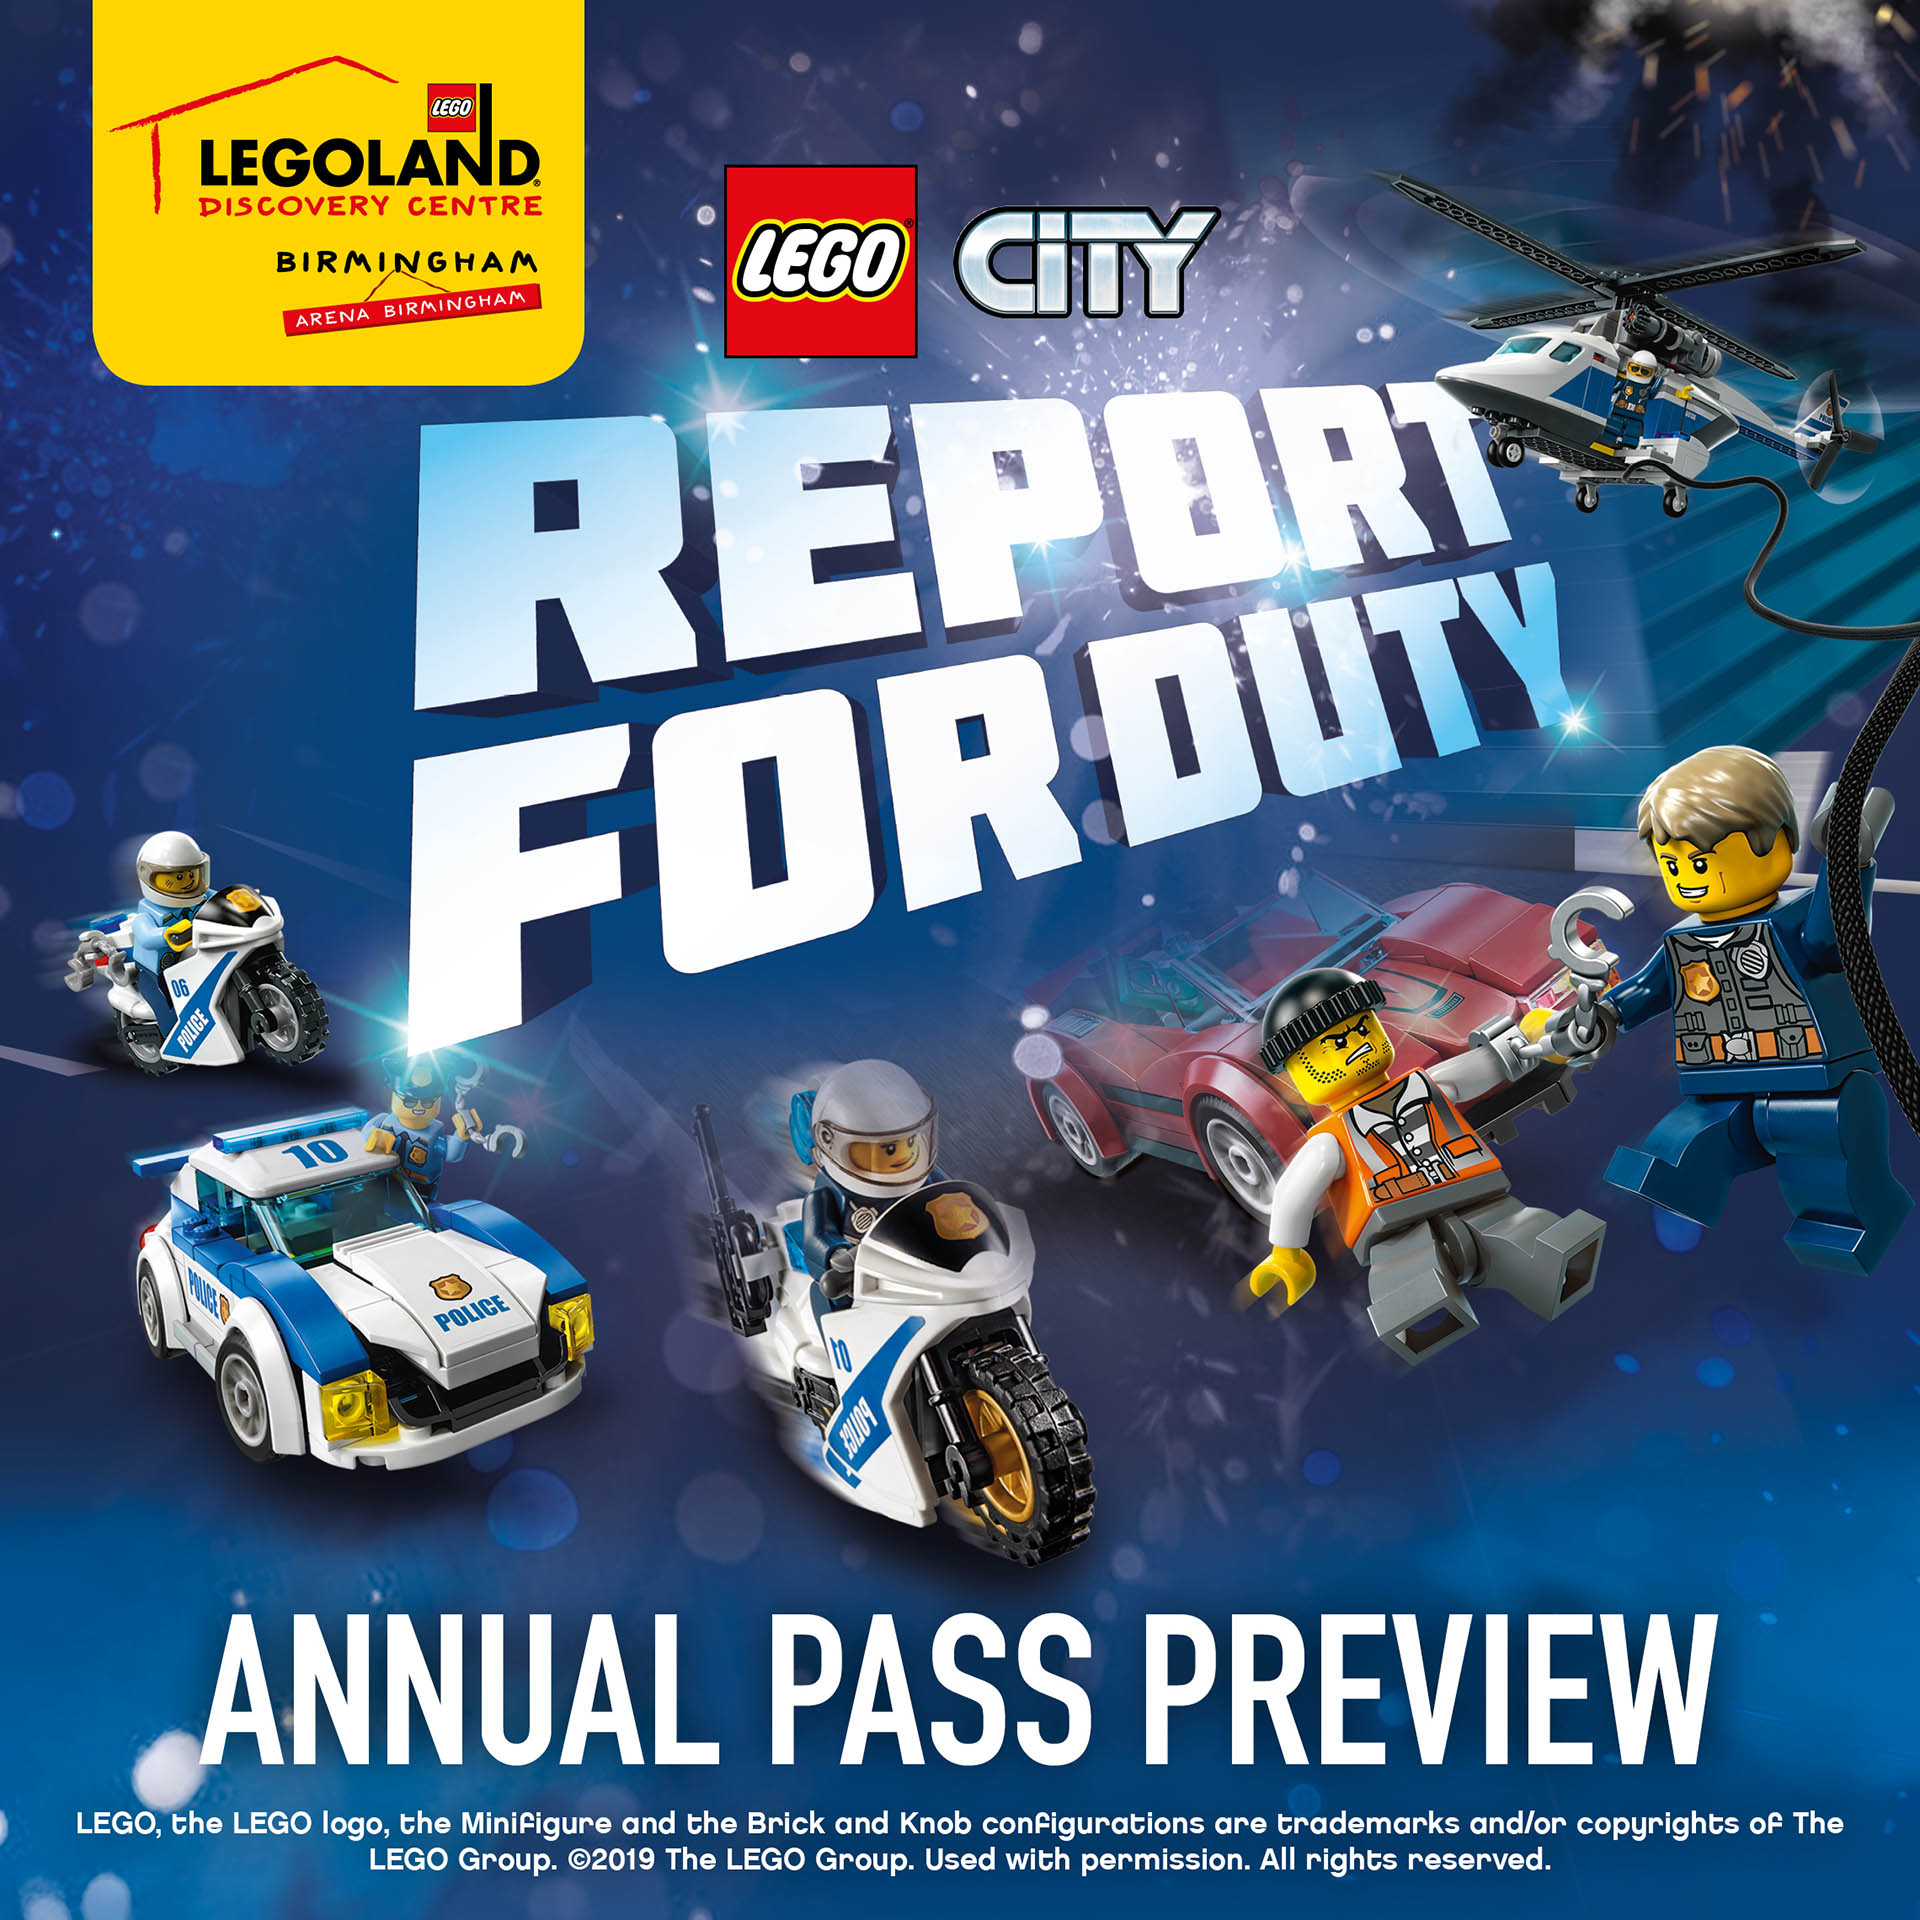 Report for Duty: Annual Pass Preview Afternoon